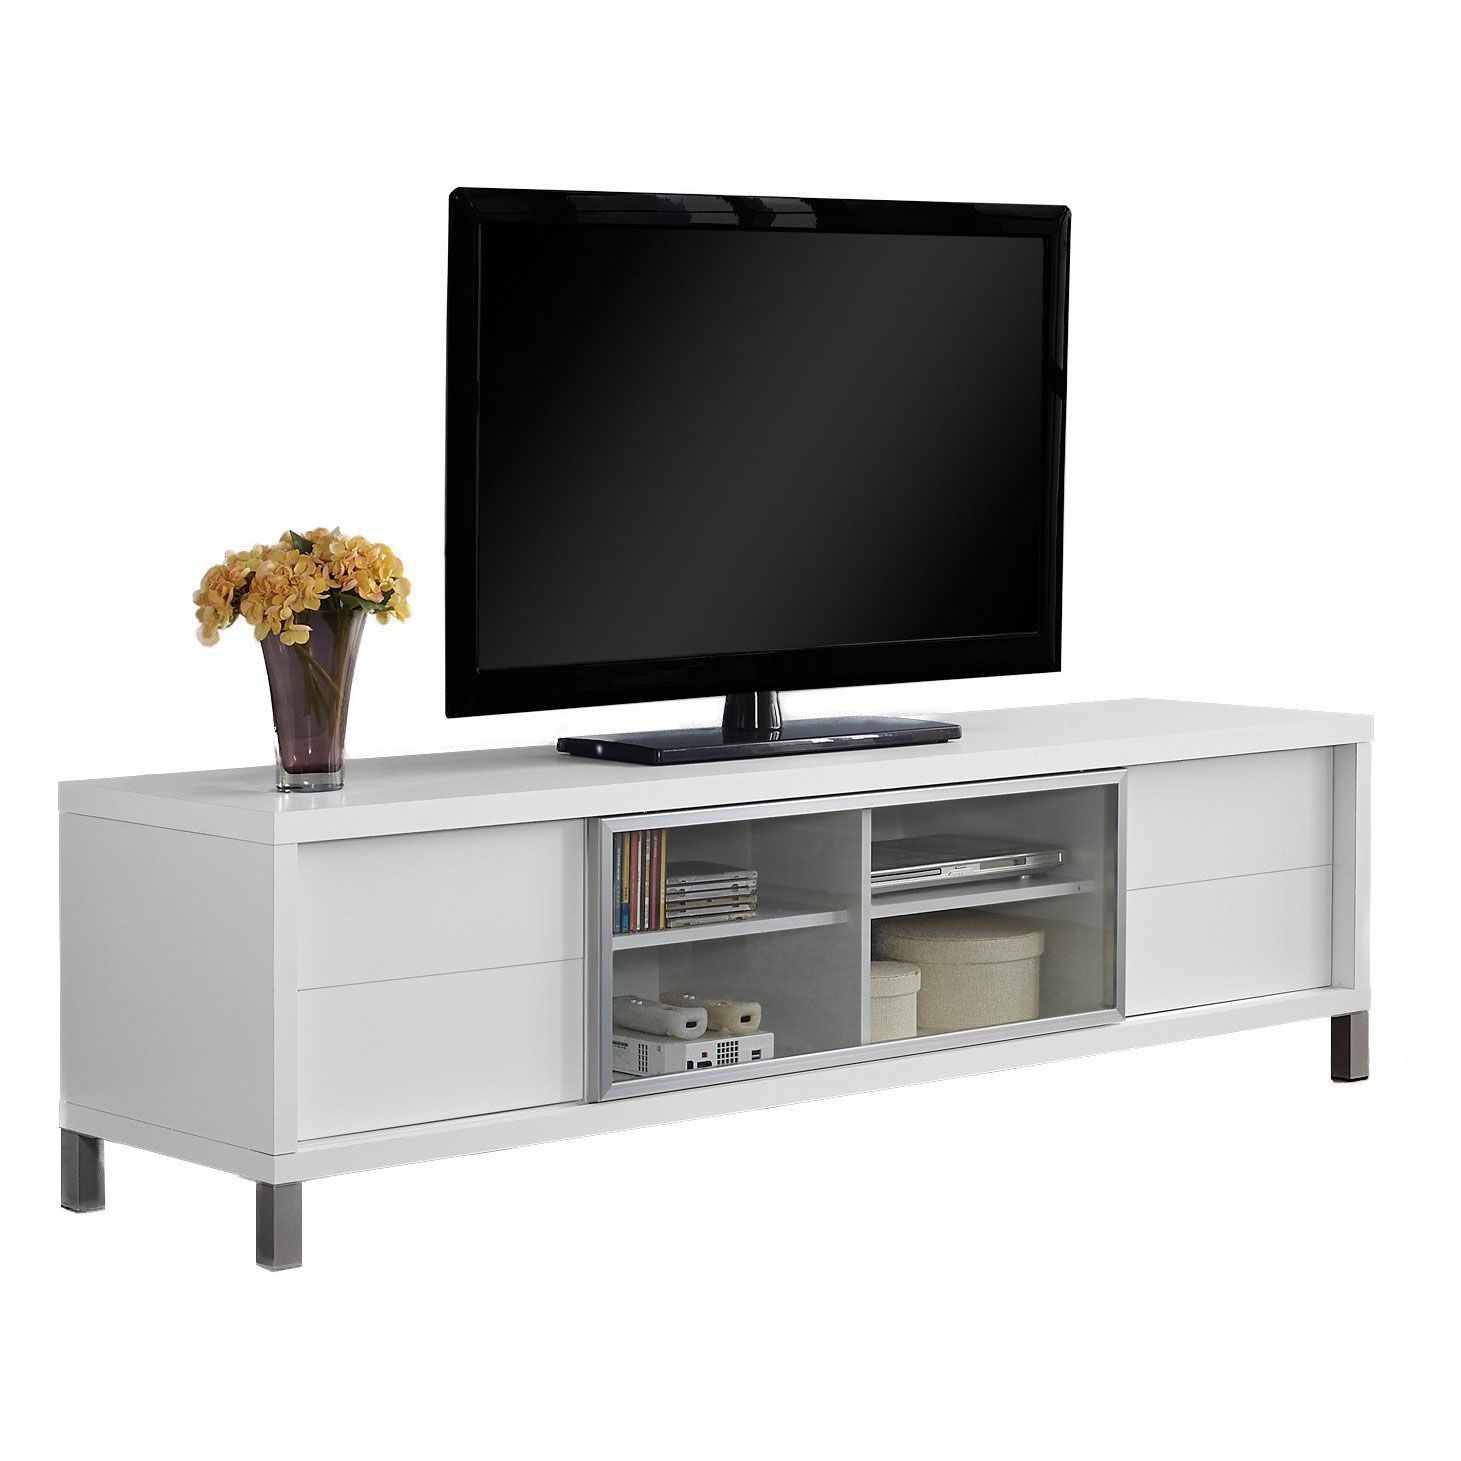 Monarch Tv Stand White Euro Style For Tvs Up To 70"l Throughout Kinsella Tv Stands For Tvs Up To 70" (View 2 of 15)